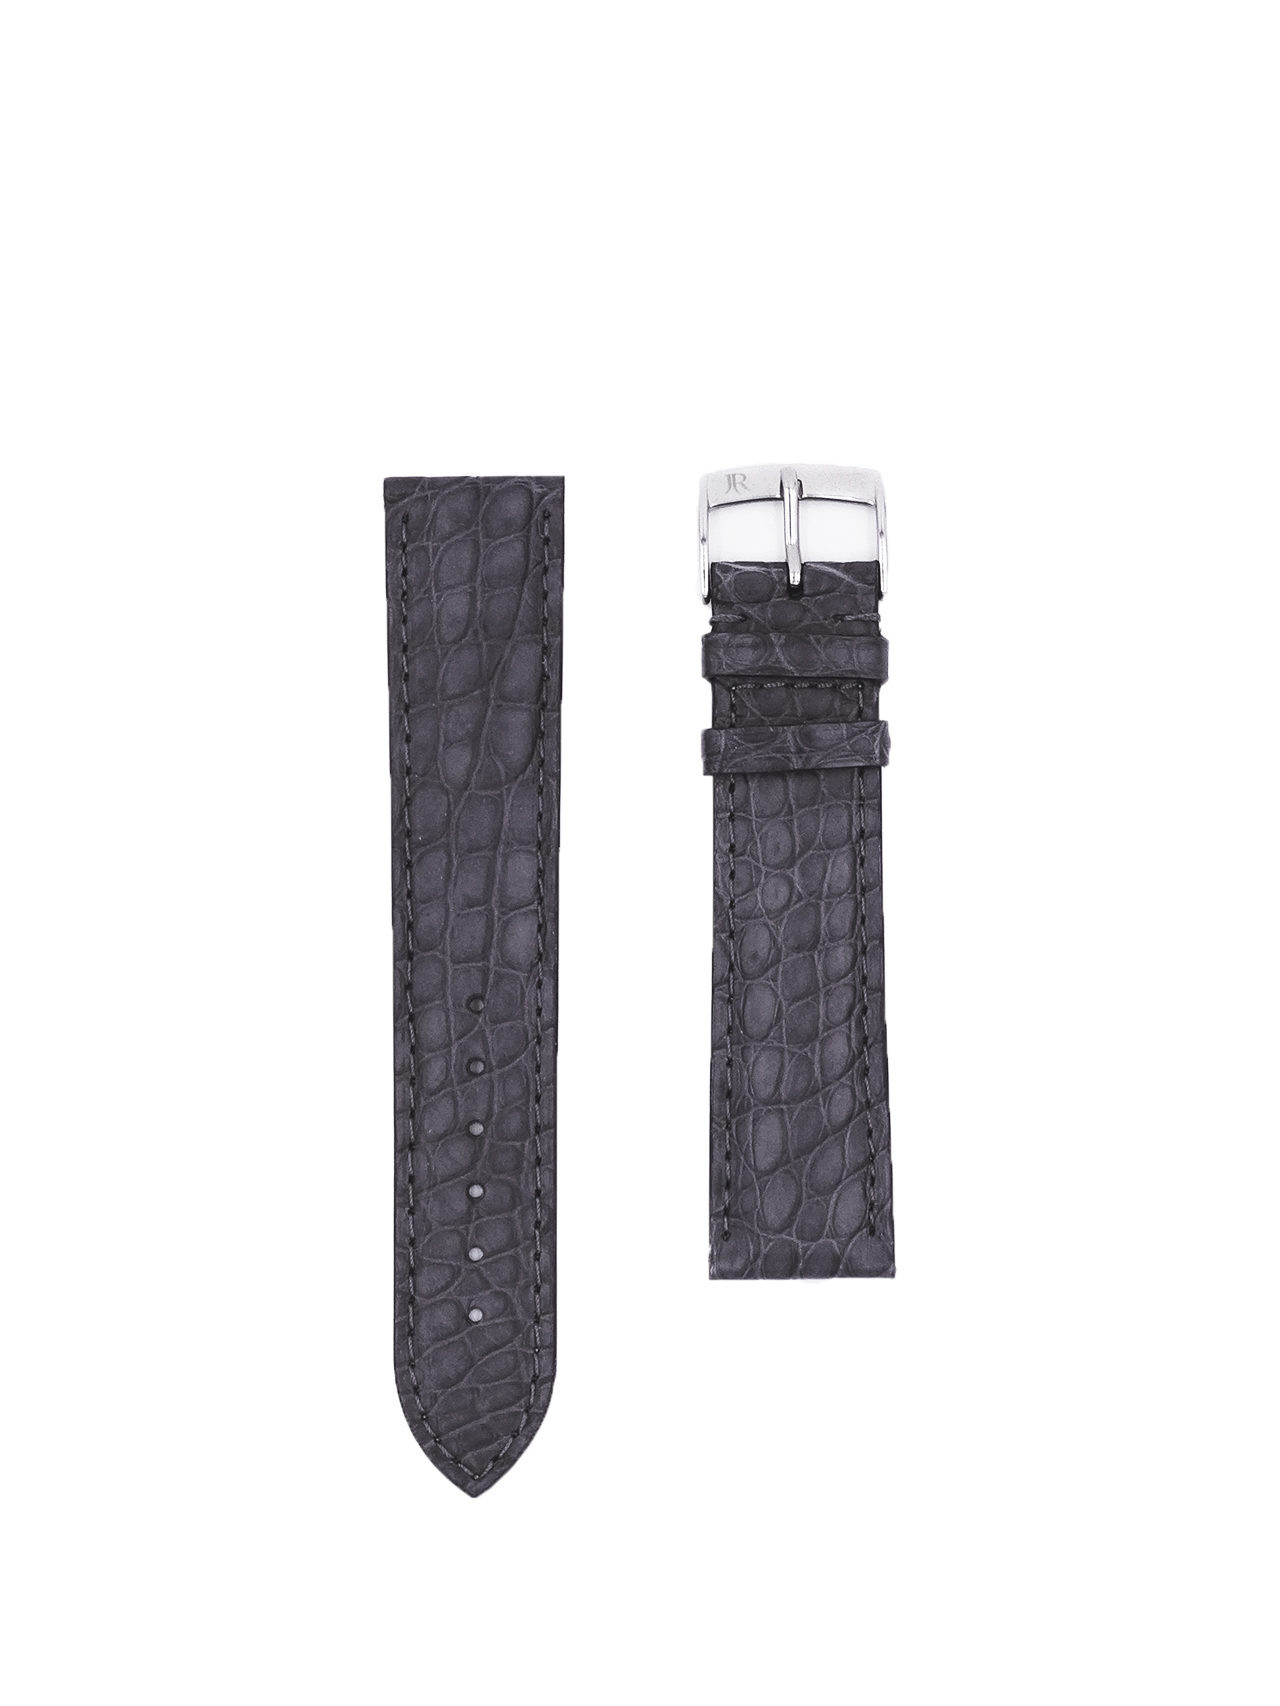 Watch strap leather 20